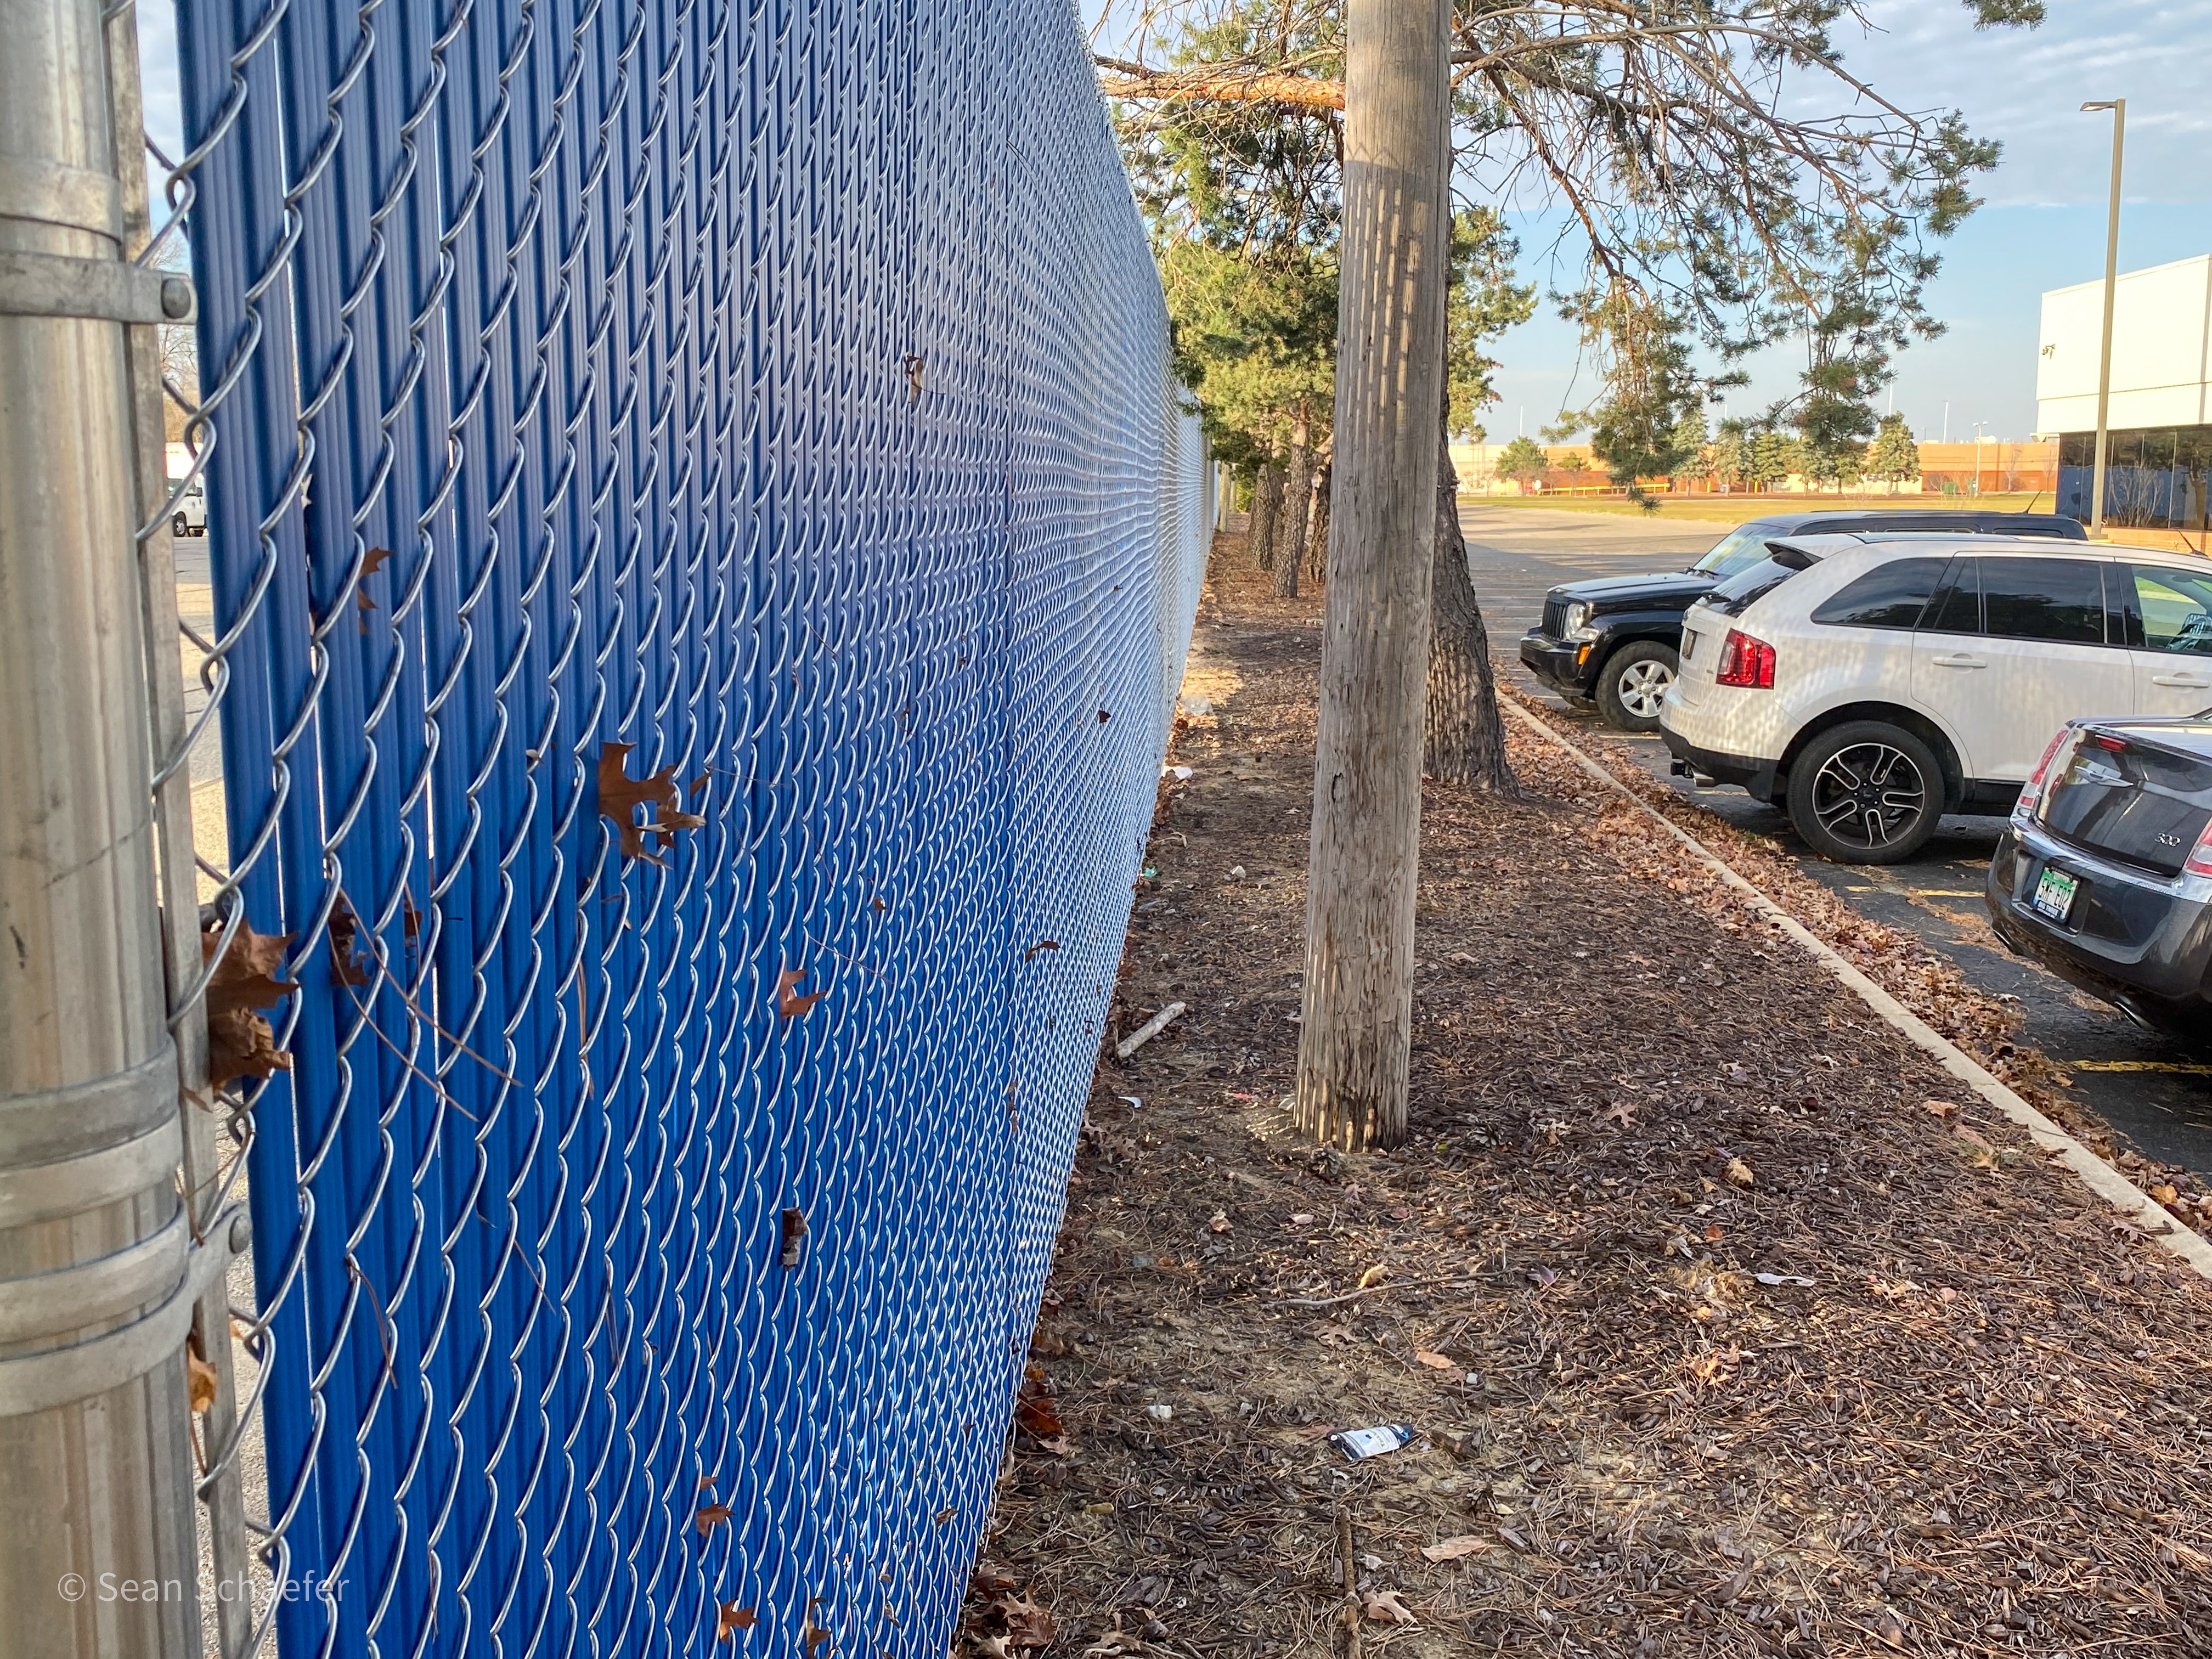 Image of commercial chain link fencing and gates at the Lamphere High School